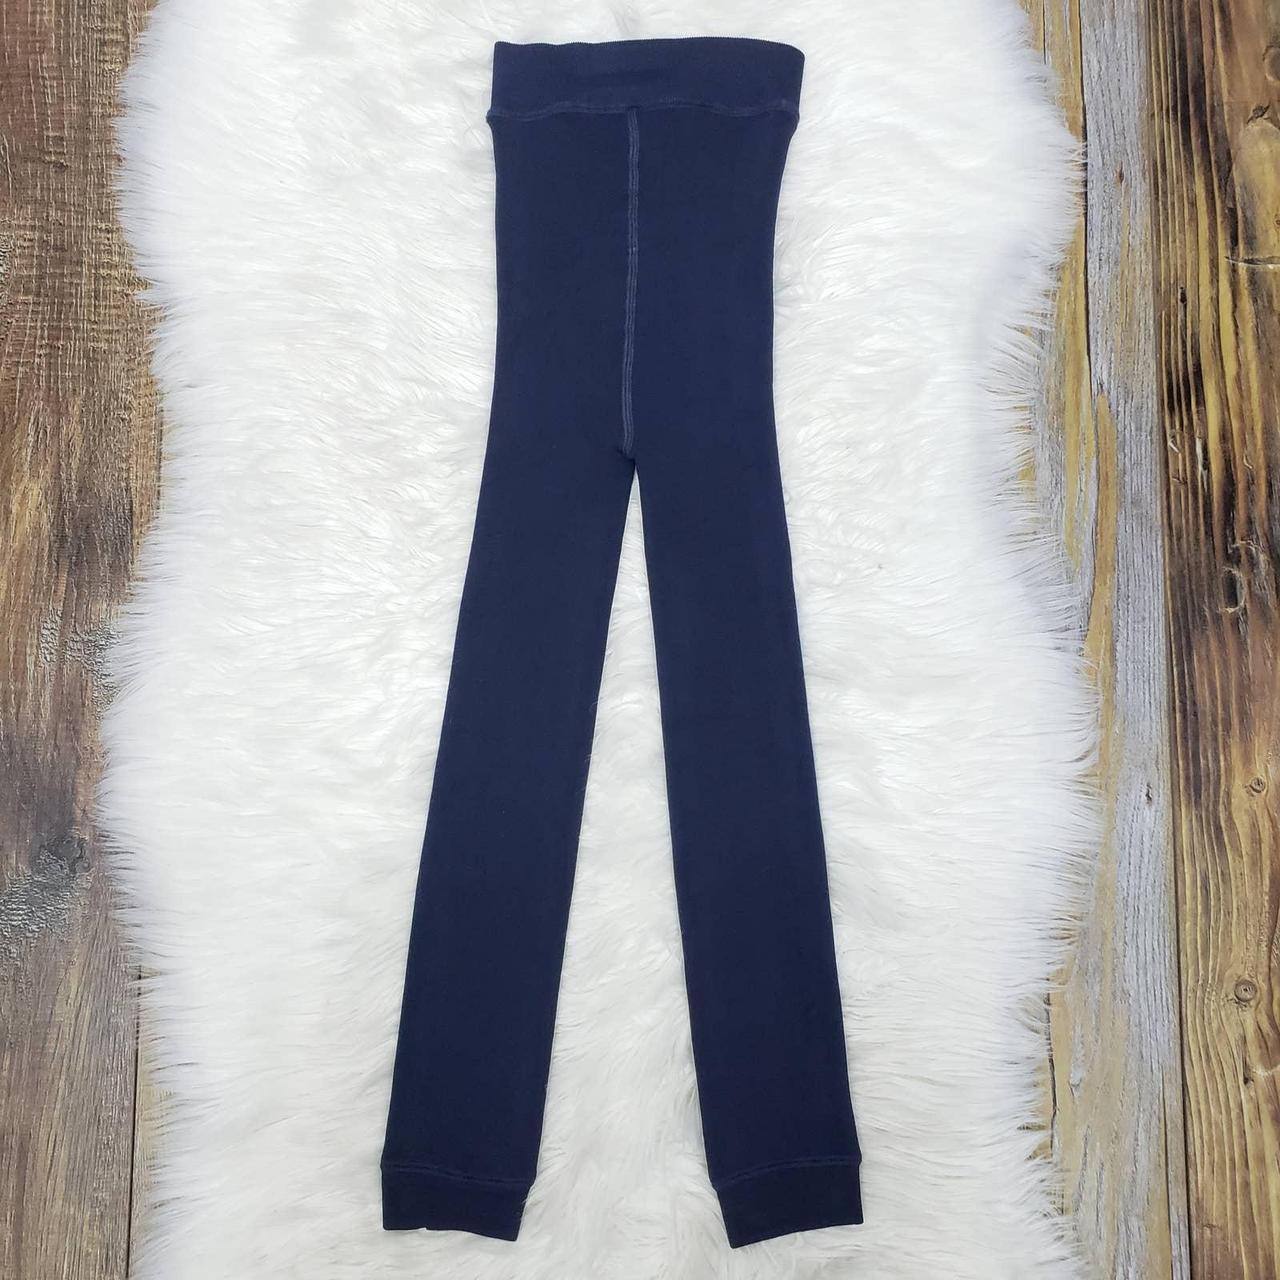 Primark Faux Fur Lined Leggings OFF-63% >Free Delivery, 53% OFF